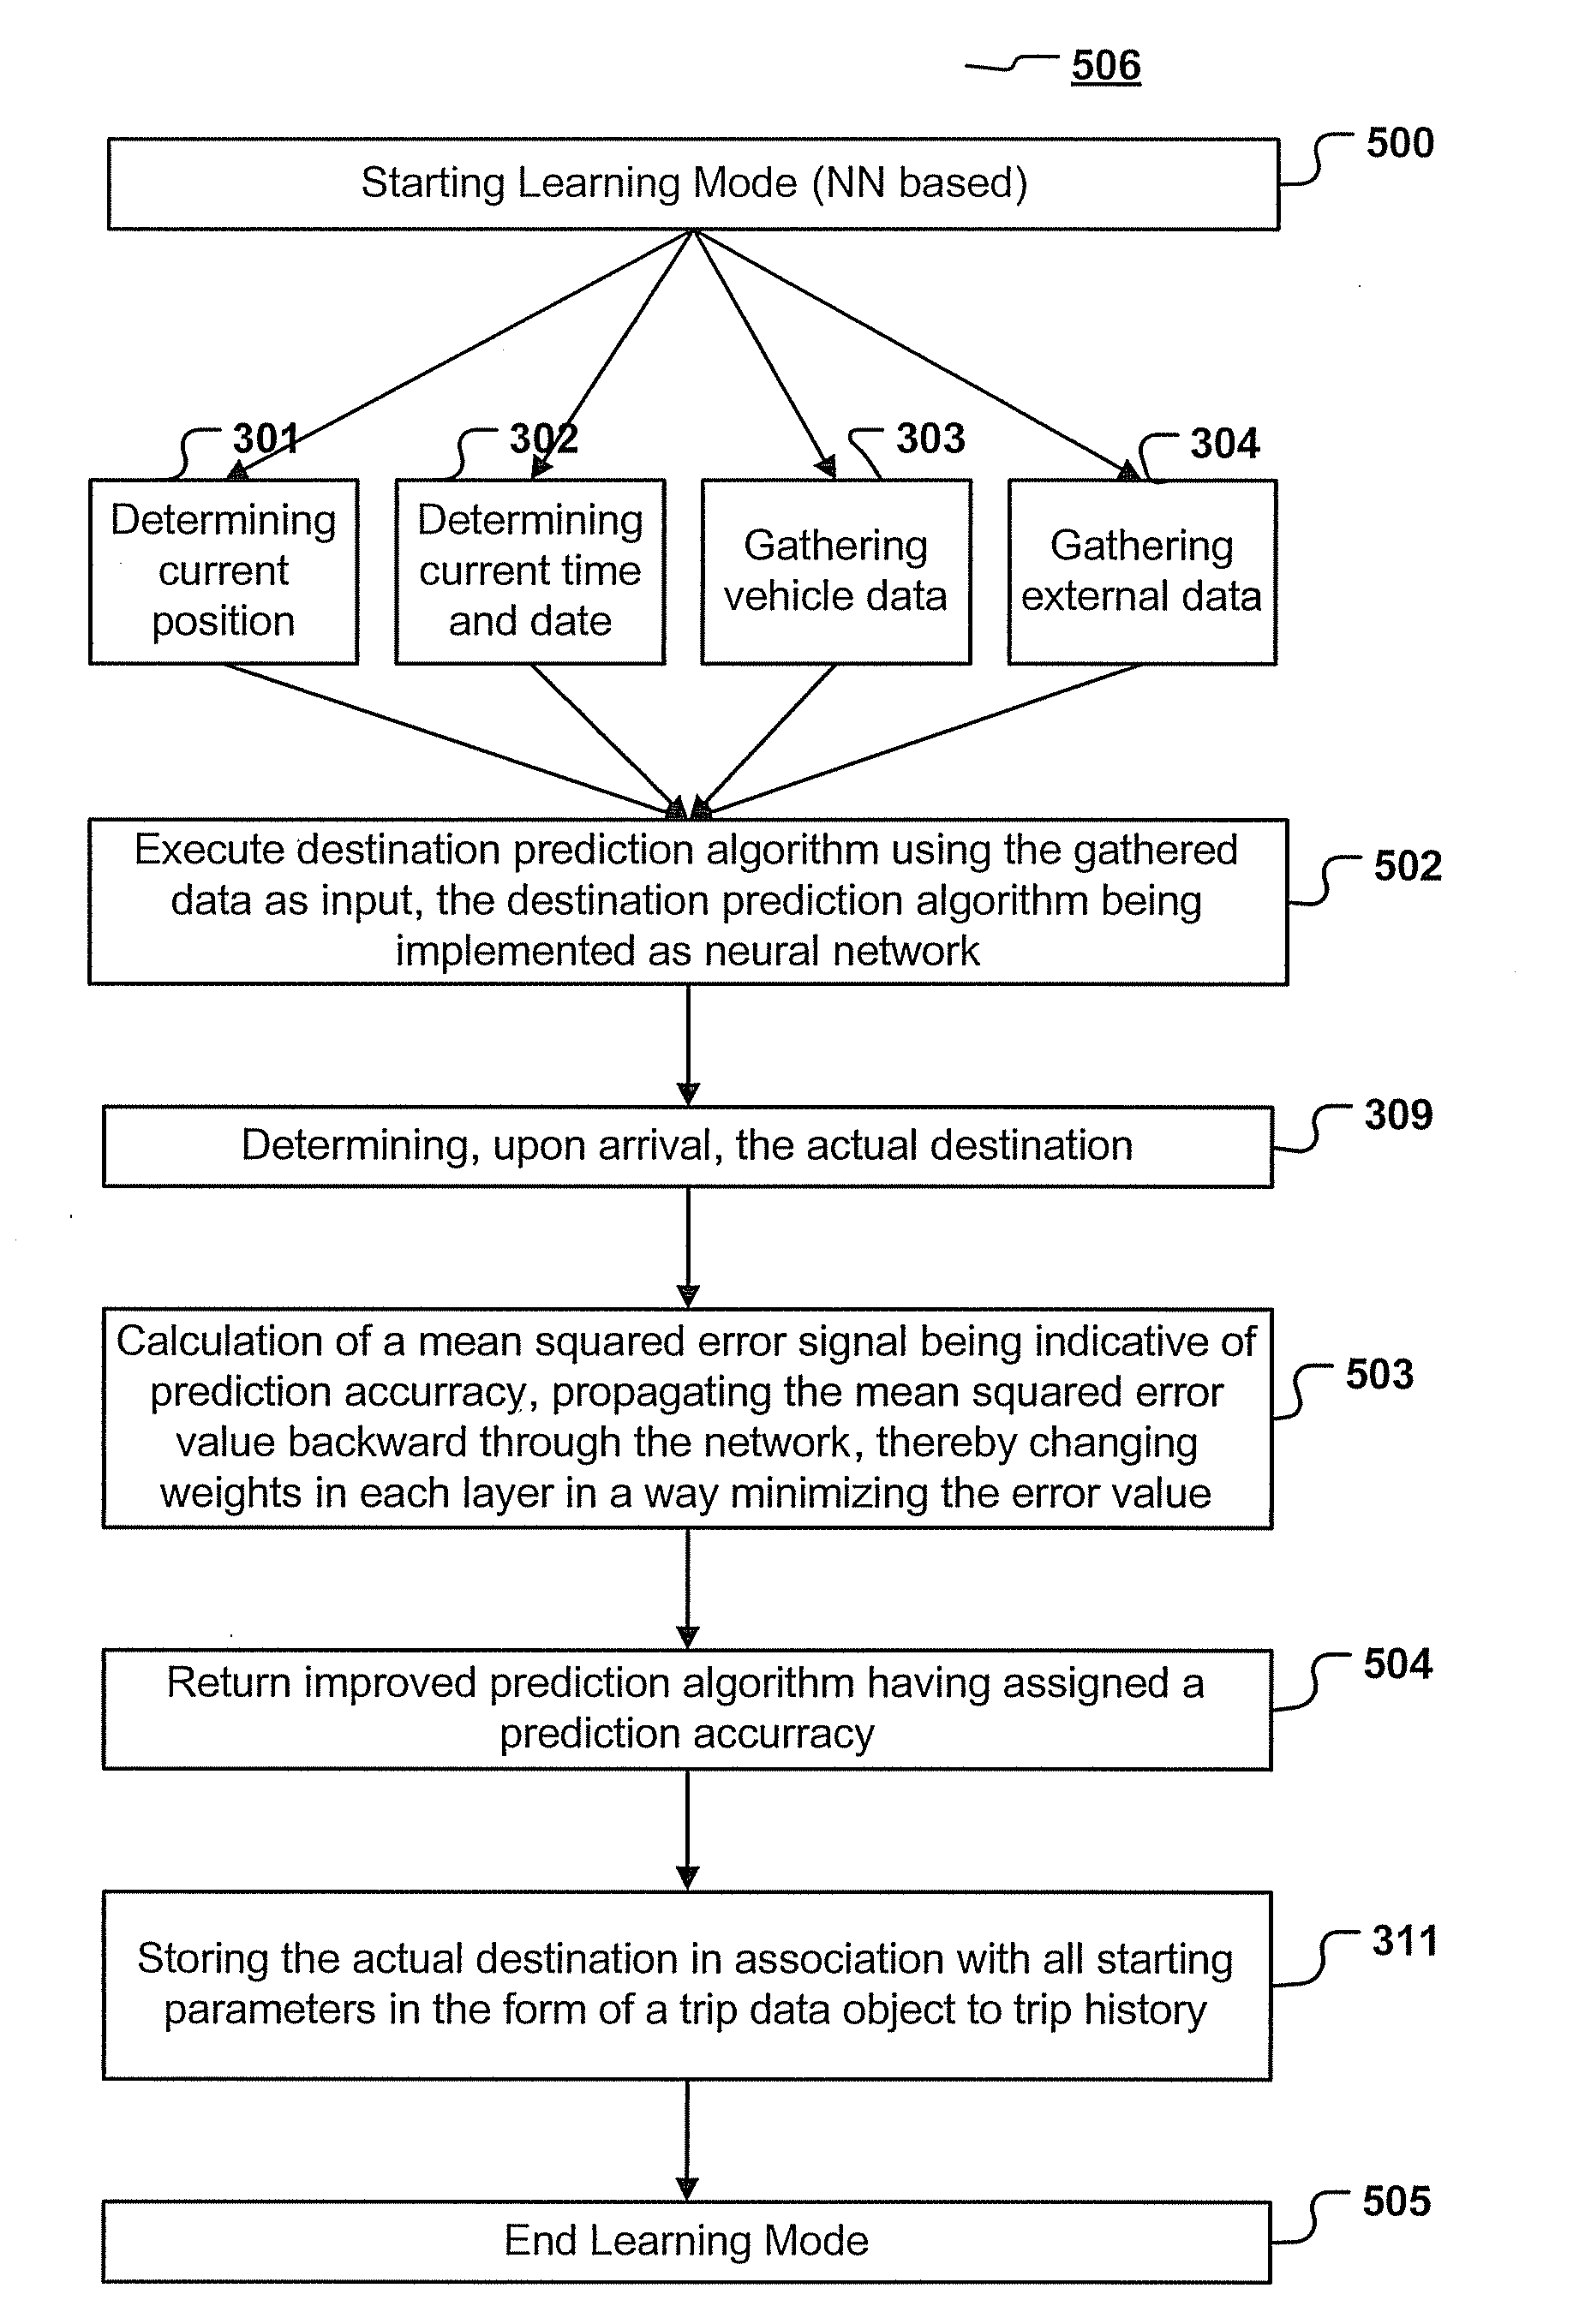 Navigation device and method for predicting the destination of a trip